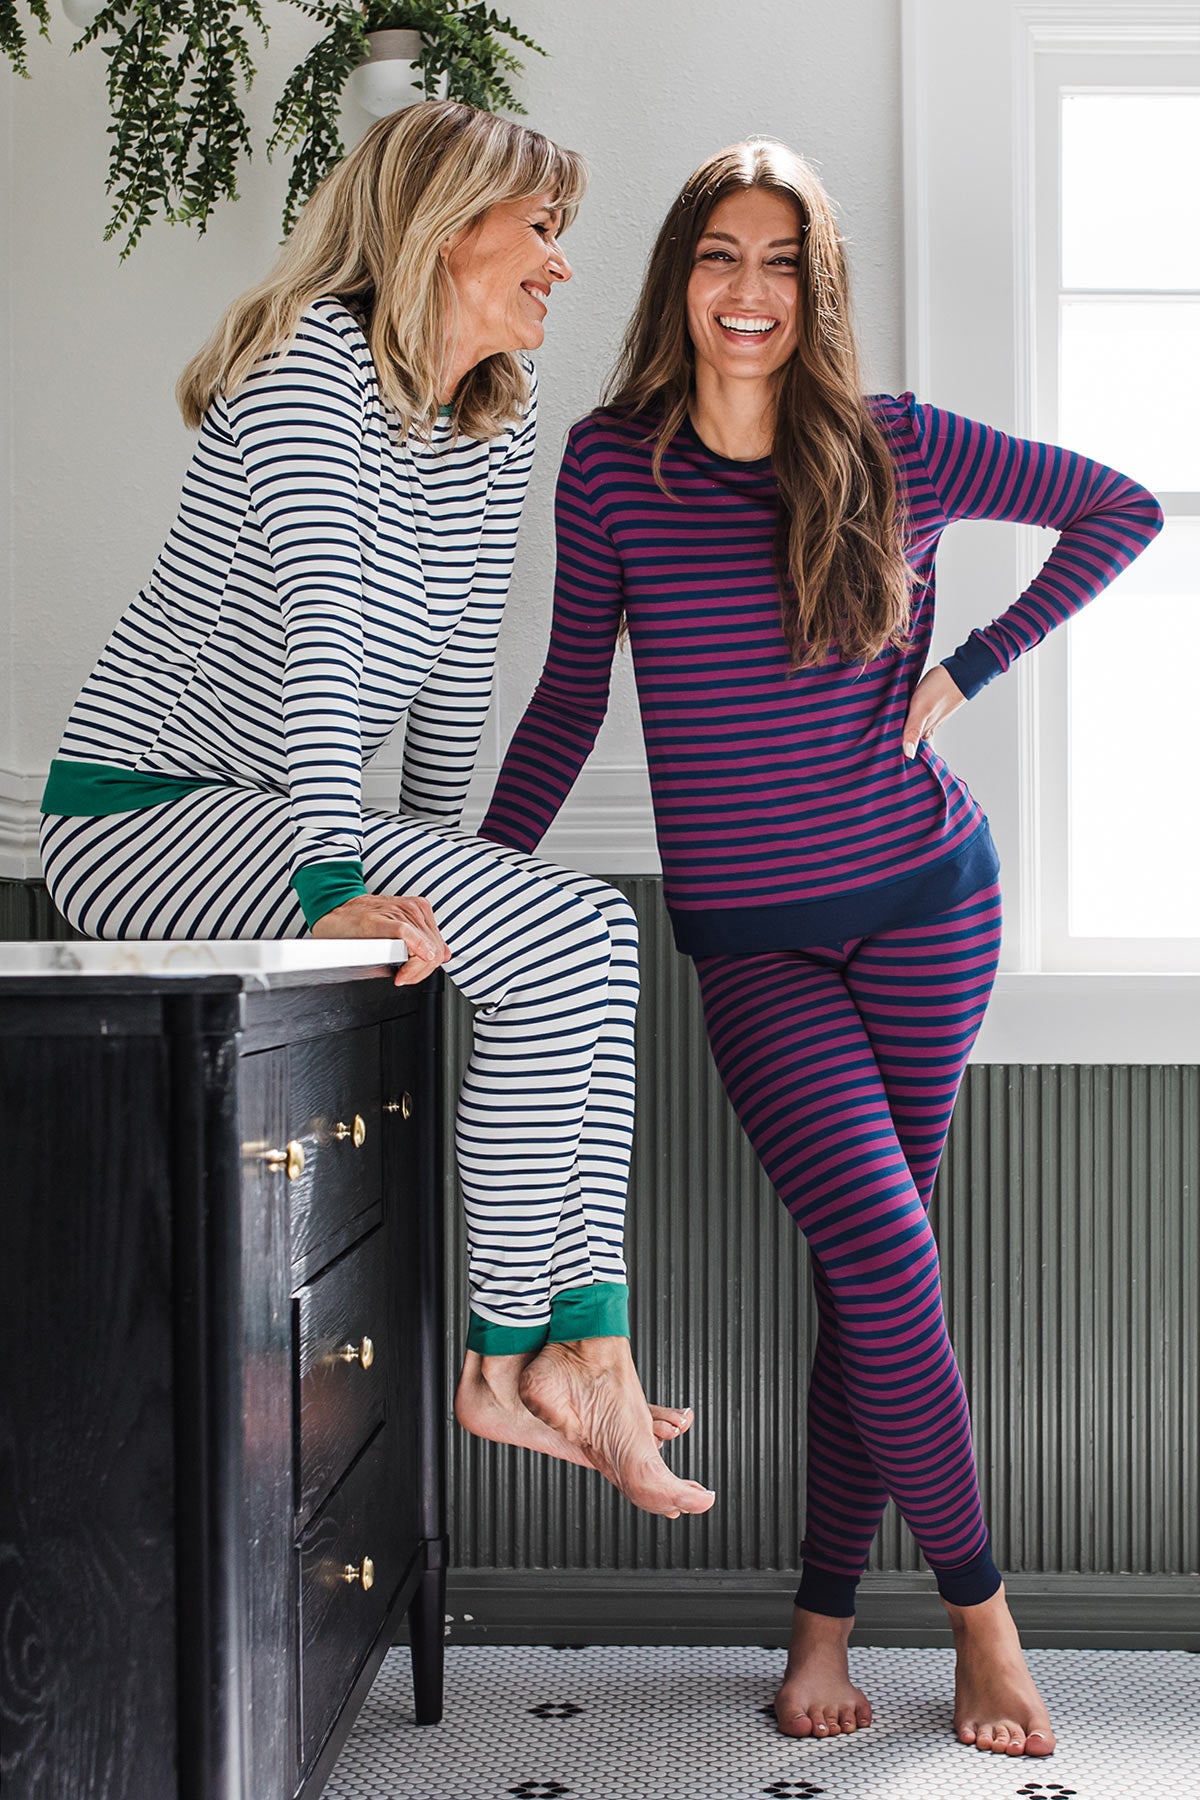 Two women smiling together, one standing with one hand on her waist and the other resting on a countertop, the other sitting upon the countertop, both wearing Yala Lola Striped Bamboo Pajama Sets, one in Berry Classic Stripe and the other in Navy Newport Stripe